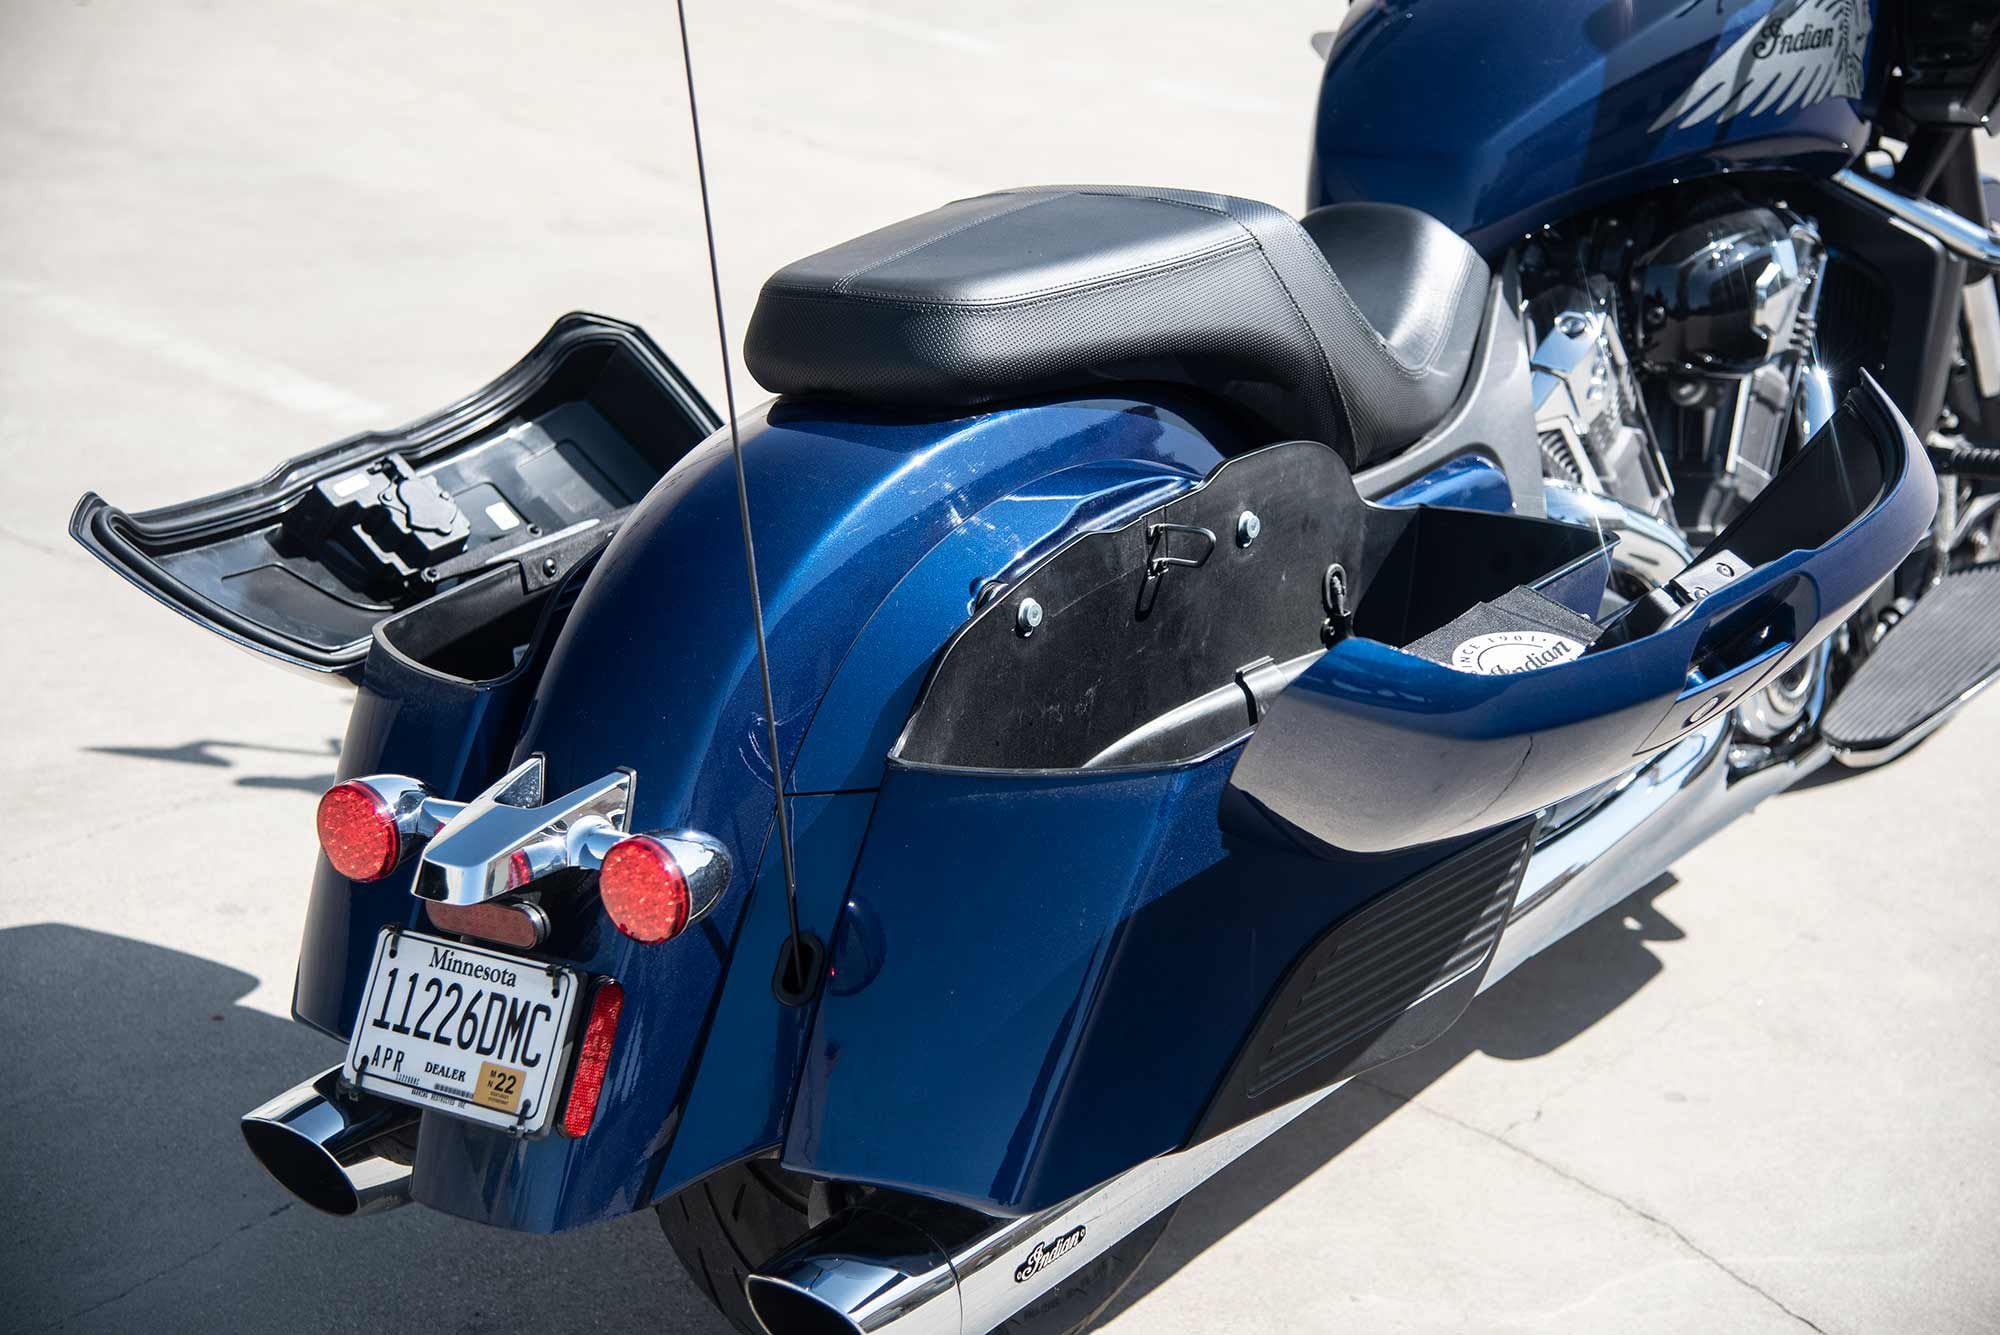 Saddlebags can be flipped open, but only when the bike is unlocked via the key fob.